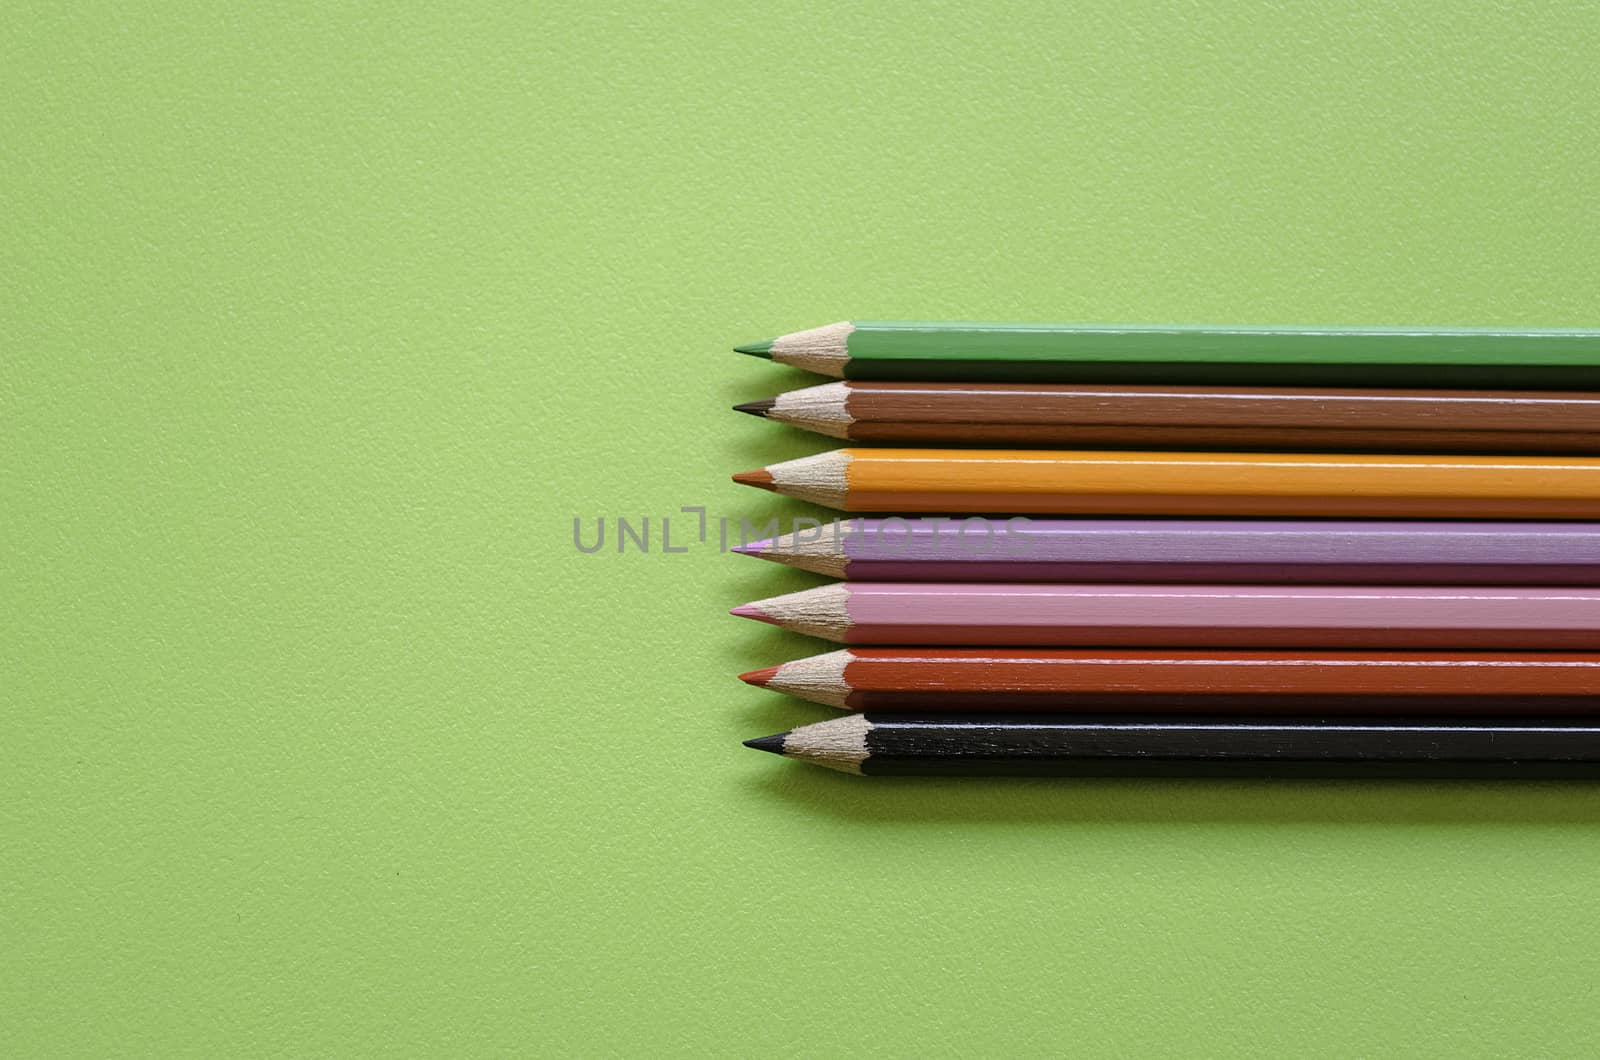 Colorful pencil crayons on a green background, back to school